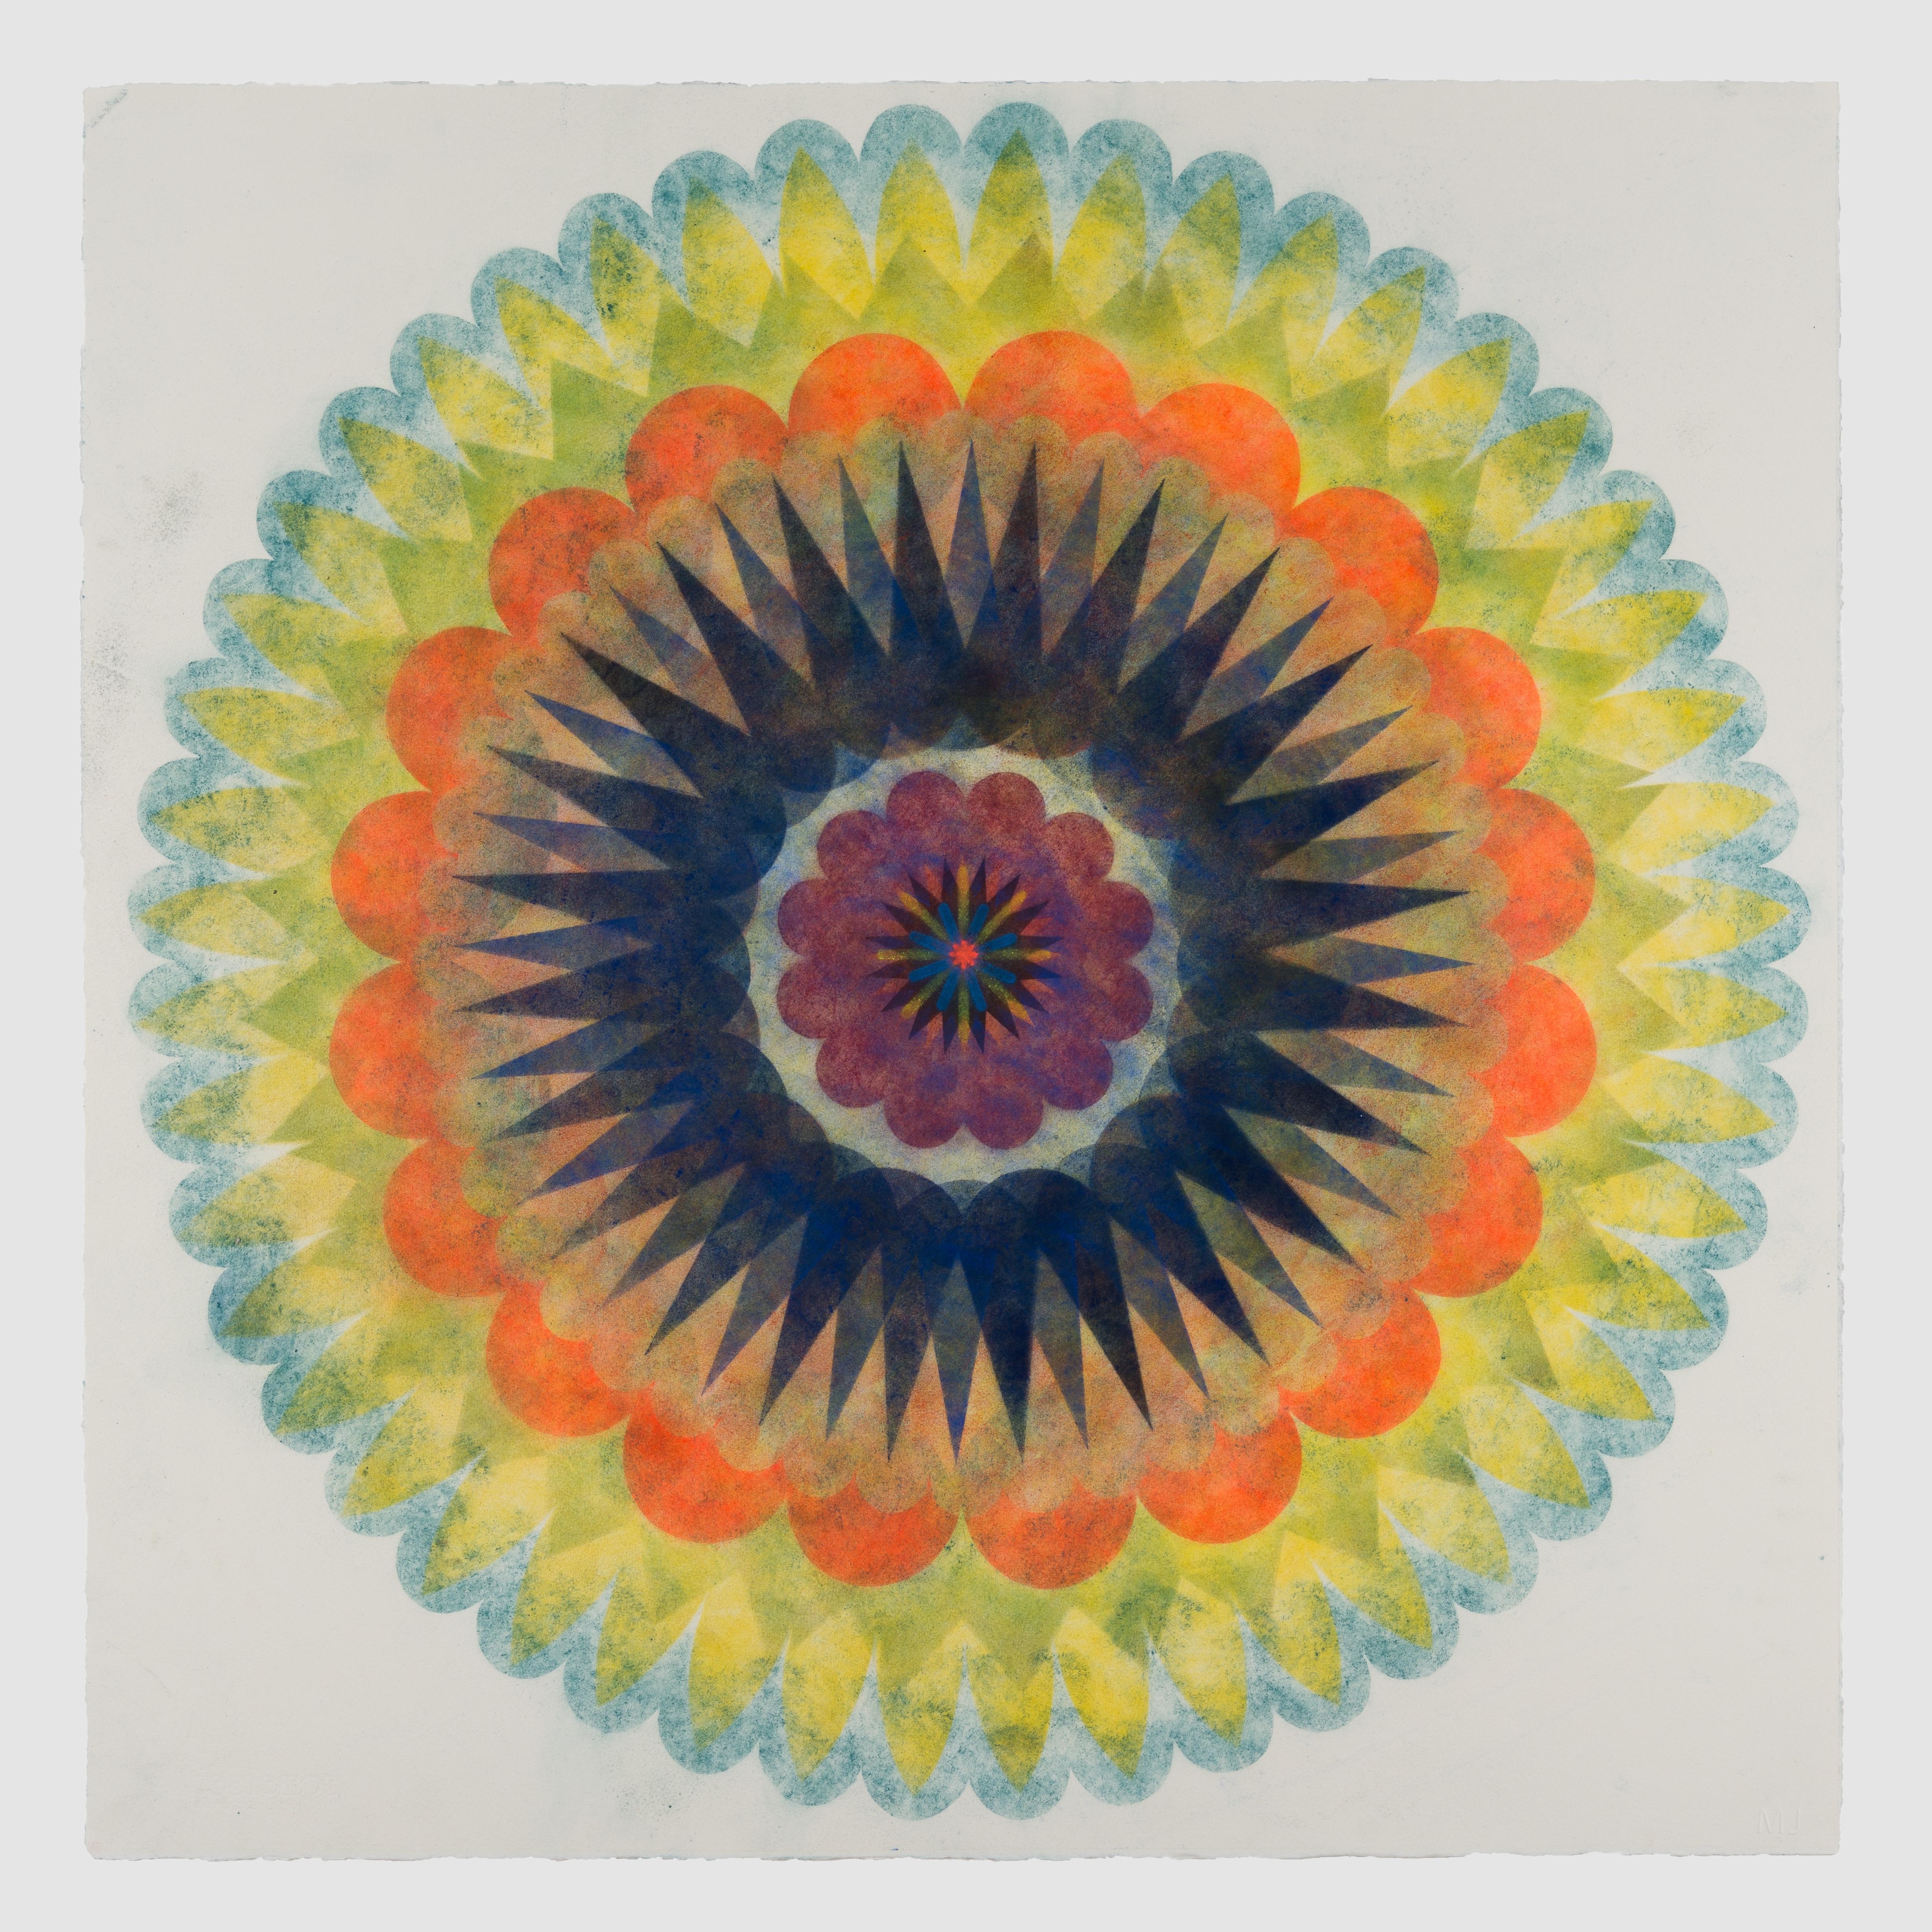 Mary Judge Abstract Drawing - Pop Flower 69, Bright Green, Teal Blue Mandala with Orange, Maroon and Navy